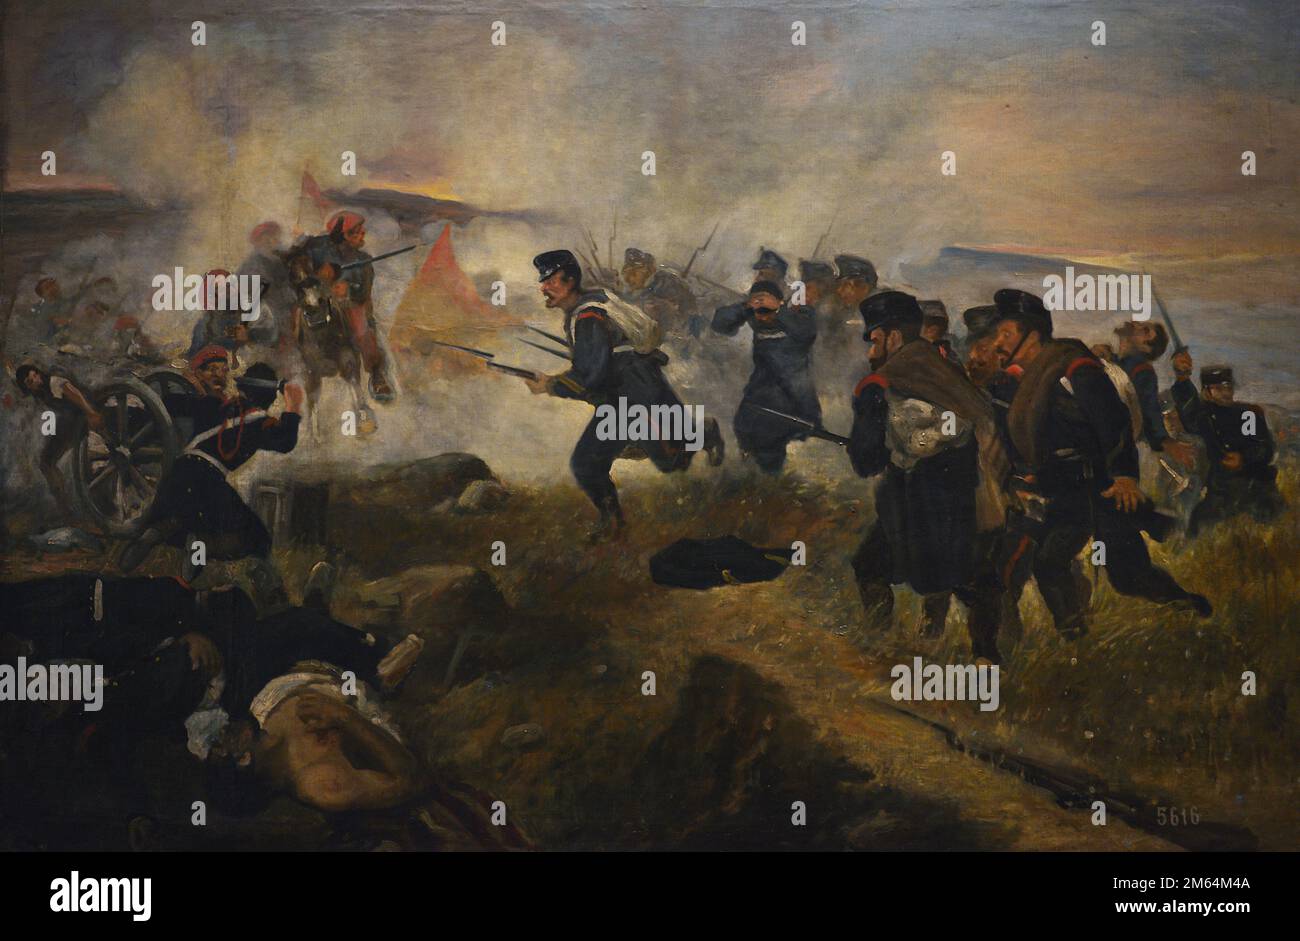 History of Spain. Third Carlist War (1872-1876). Battle of Bocairent or Camorra (December 22, 1873). 'Battle of Bocairente in the Carlist War'. Anonymous. Oil on canvas, 1873. Army Museum. Toledo, Spain. Stock Photo